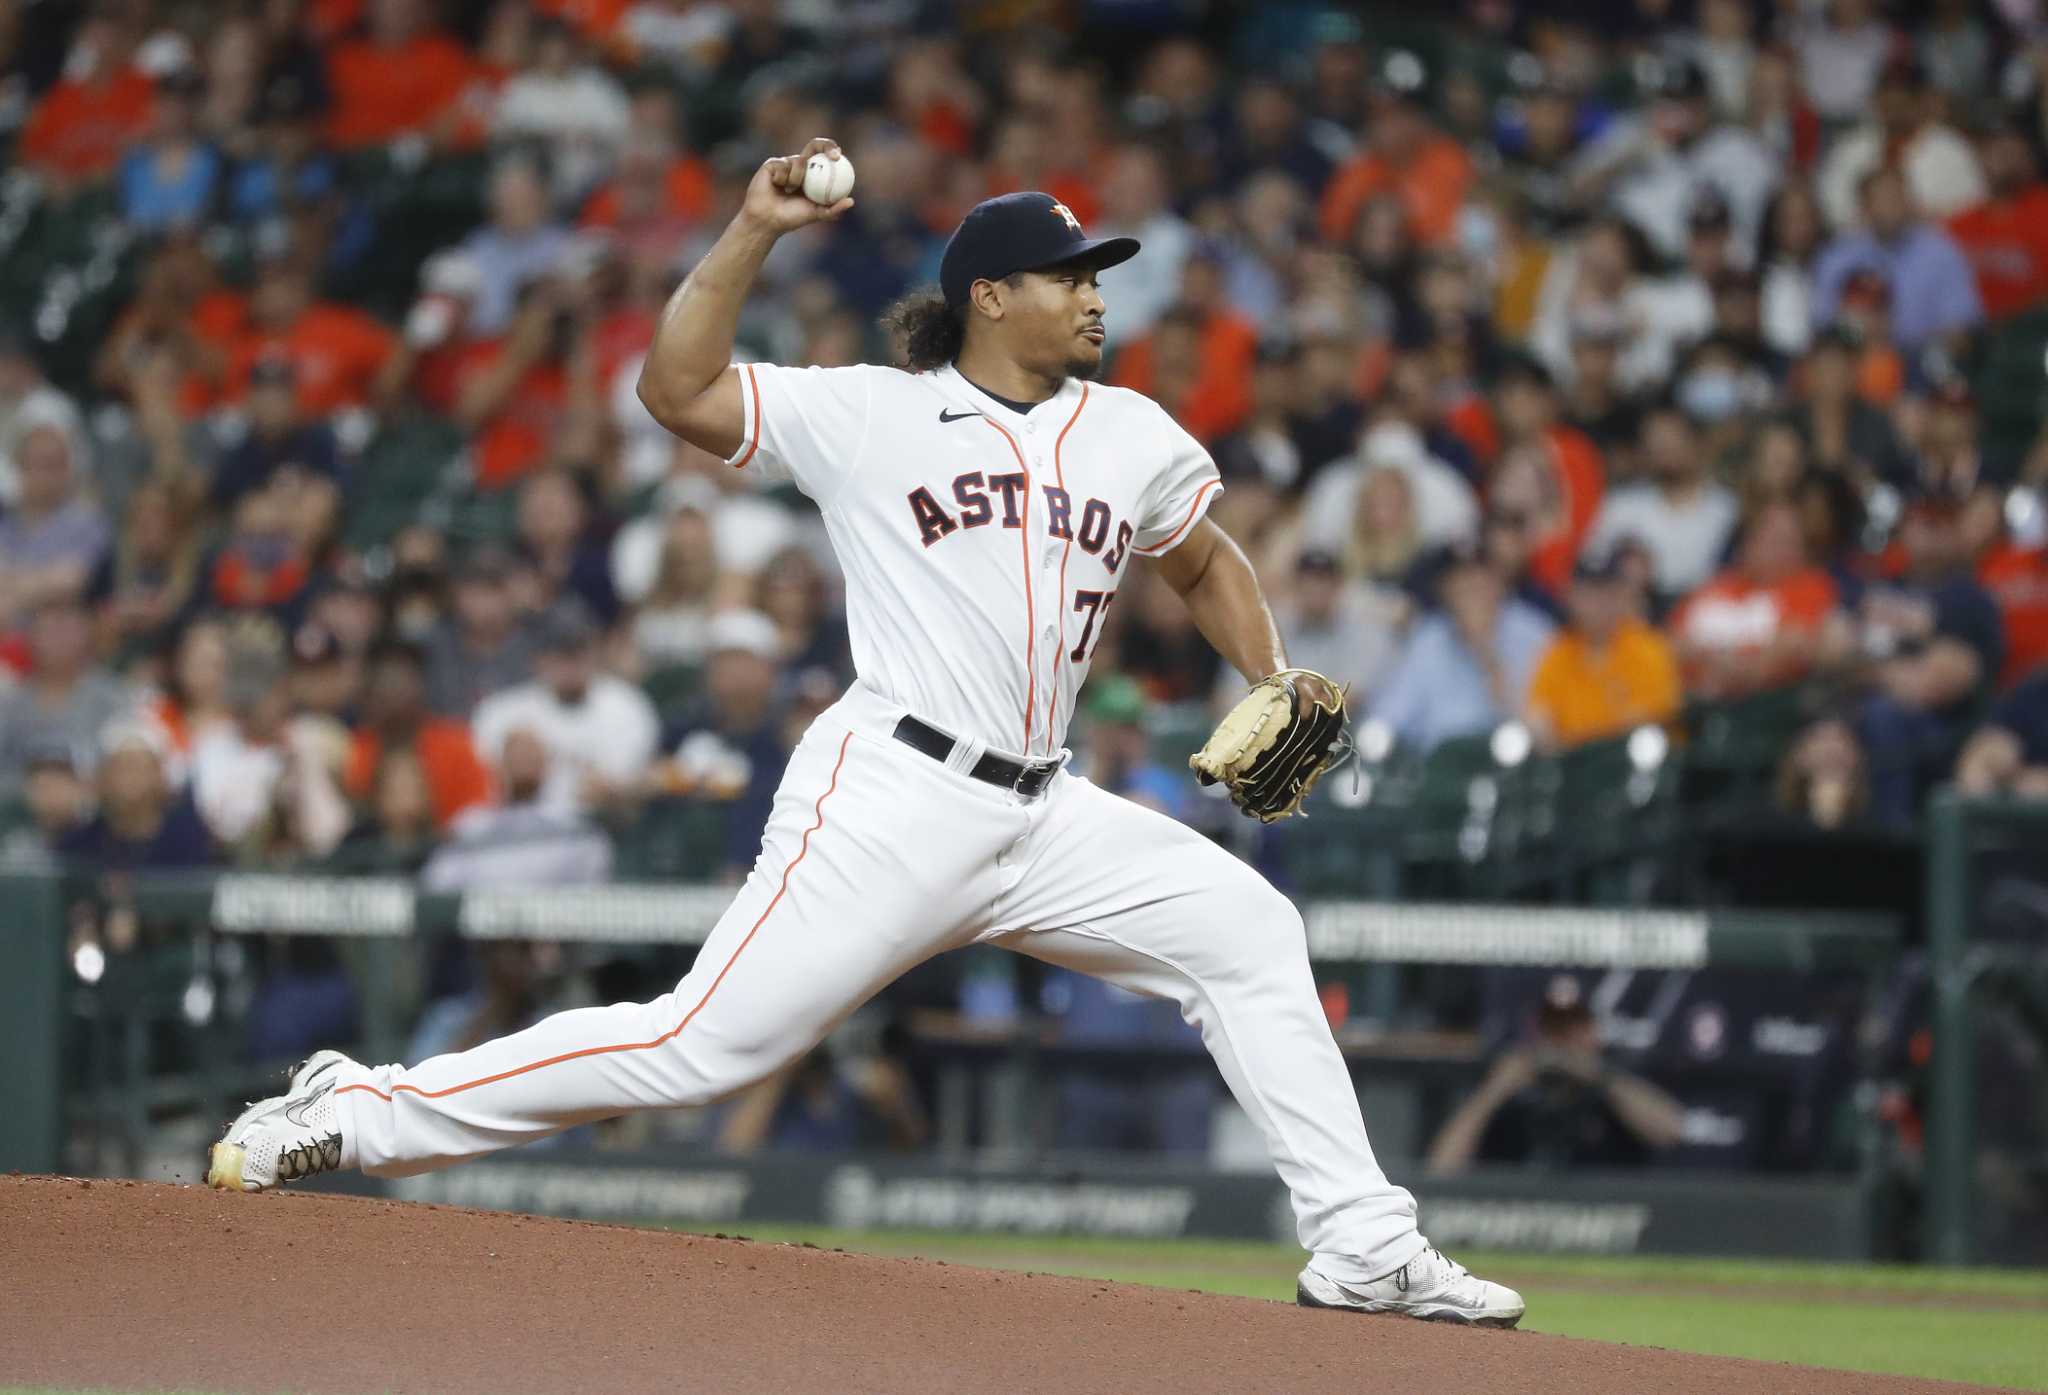 Luis Garcia guides Astros to ALCS with five scoreless relief innings